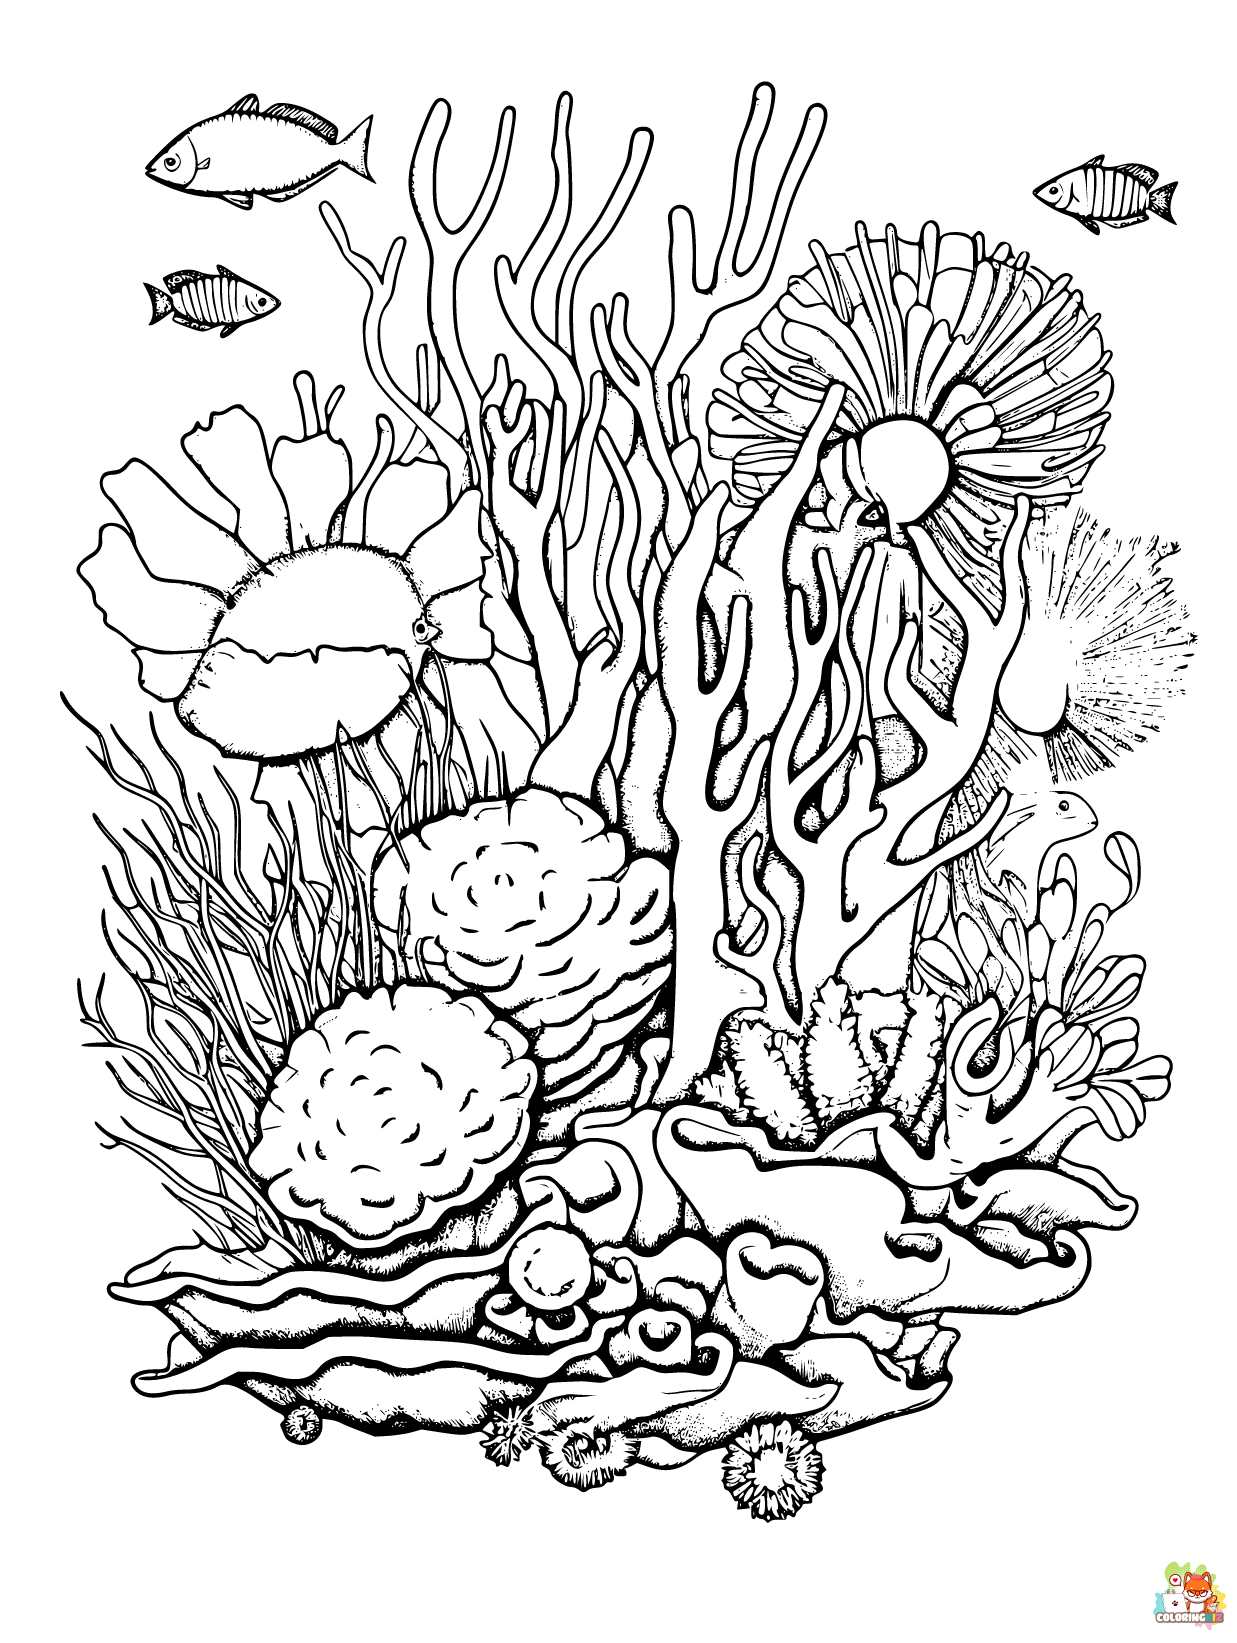 Ocean coloring pages printable 2